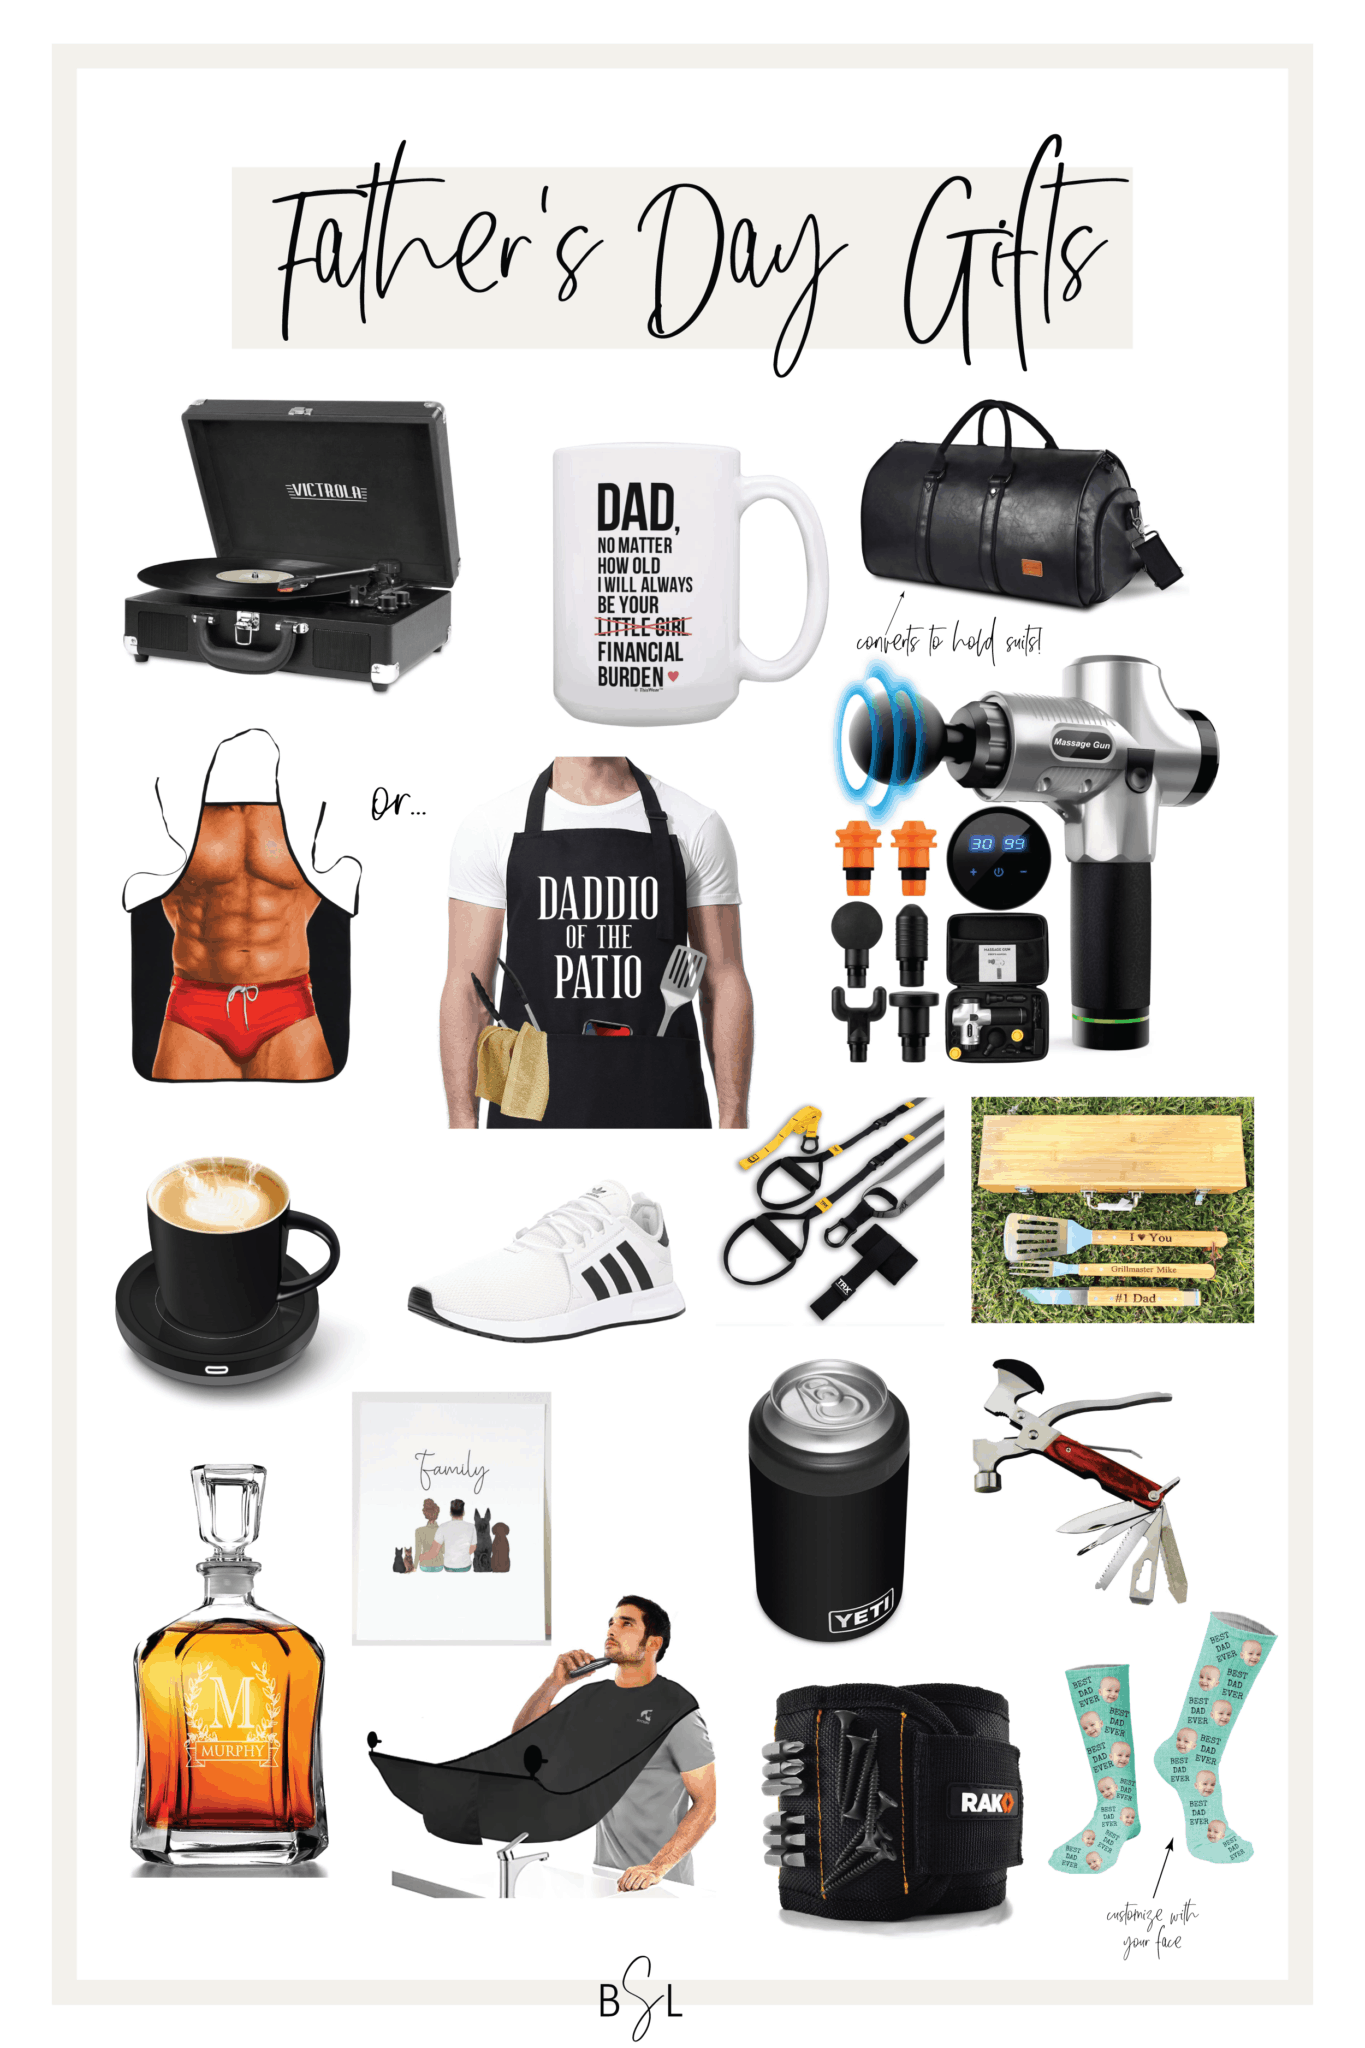 17 Fathers Day Gifts Your Dad Is Guaranteed To Love - By Sophia Lee
